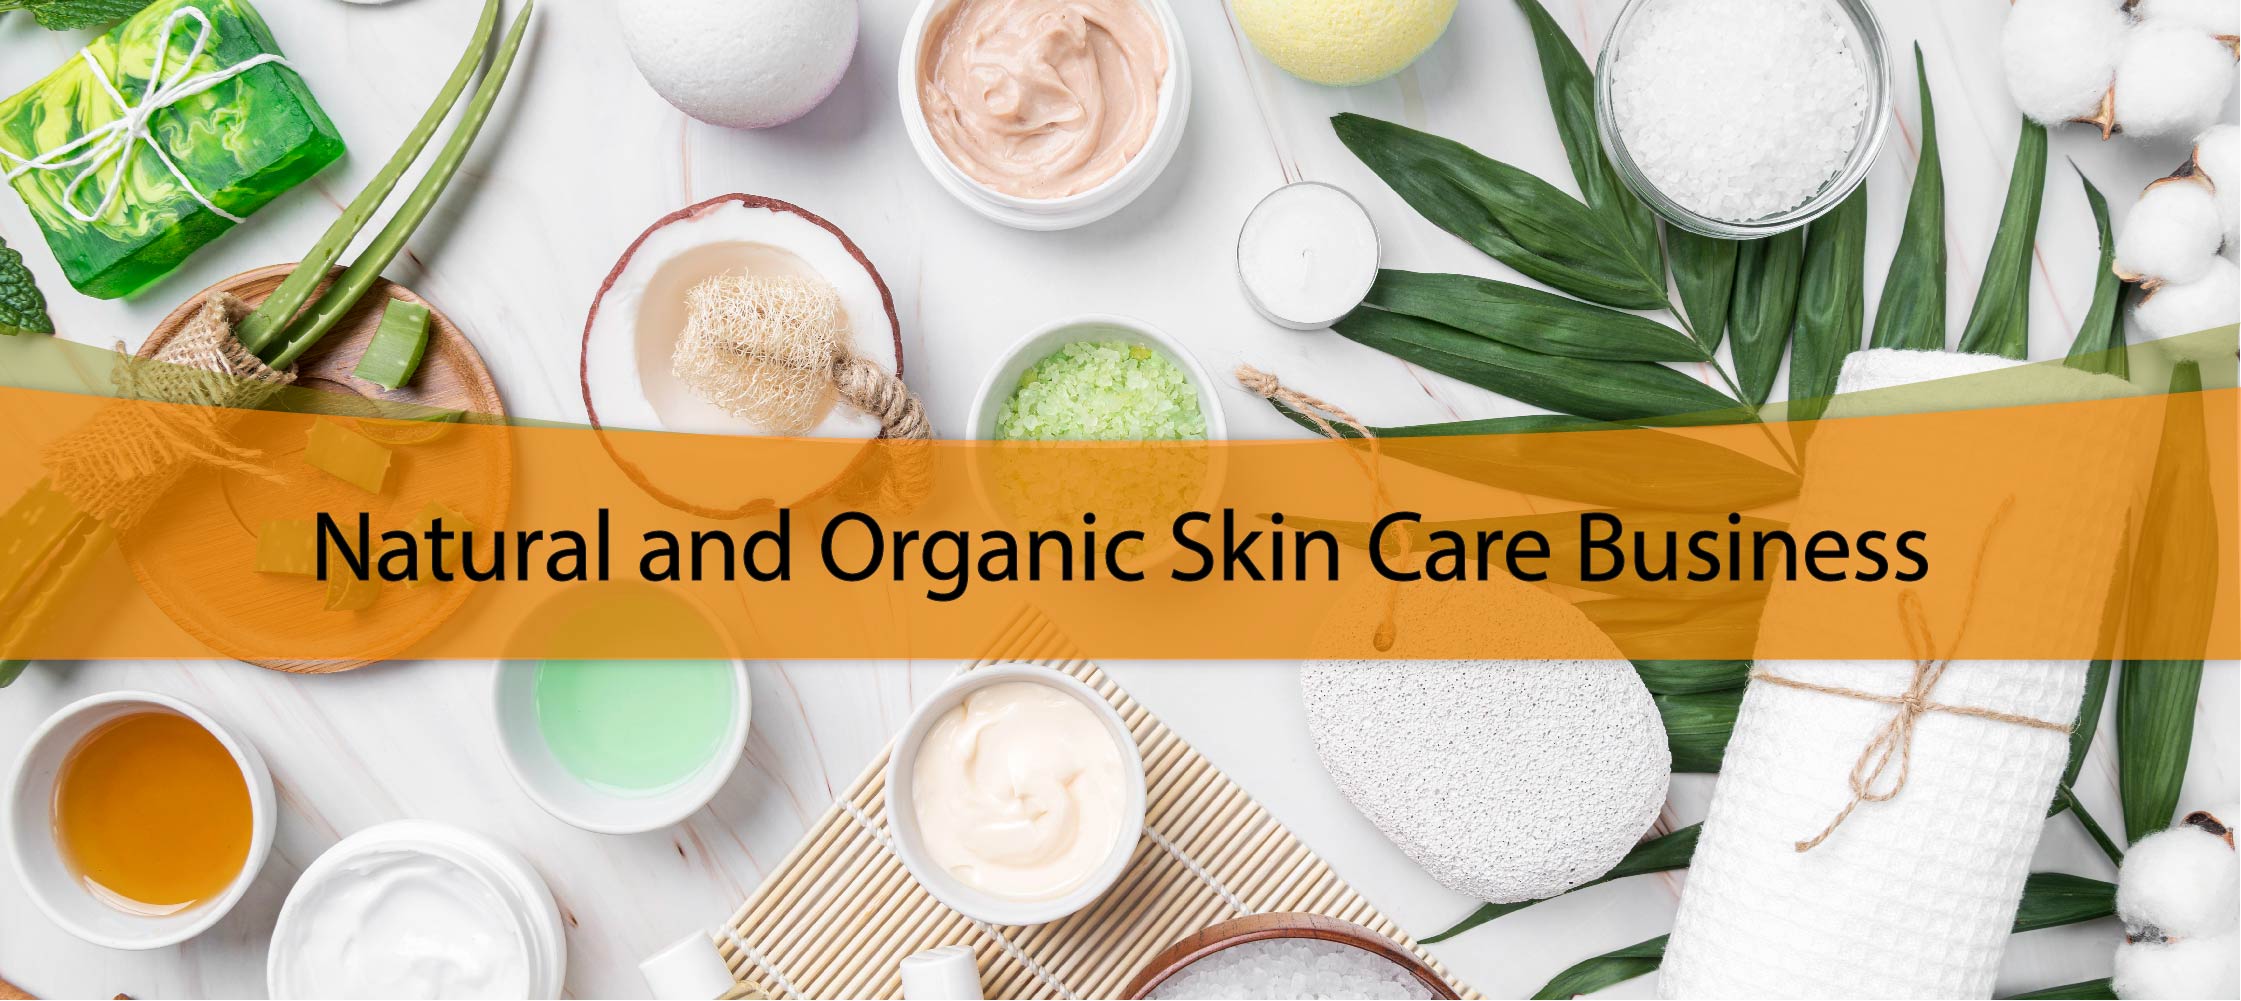 Natural and Organic Skin Care Business